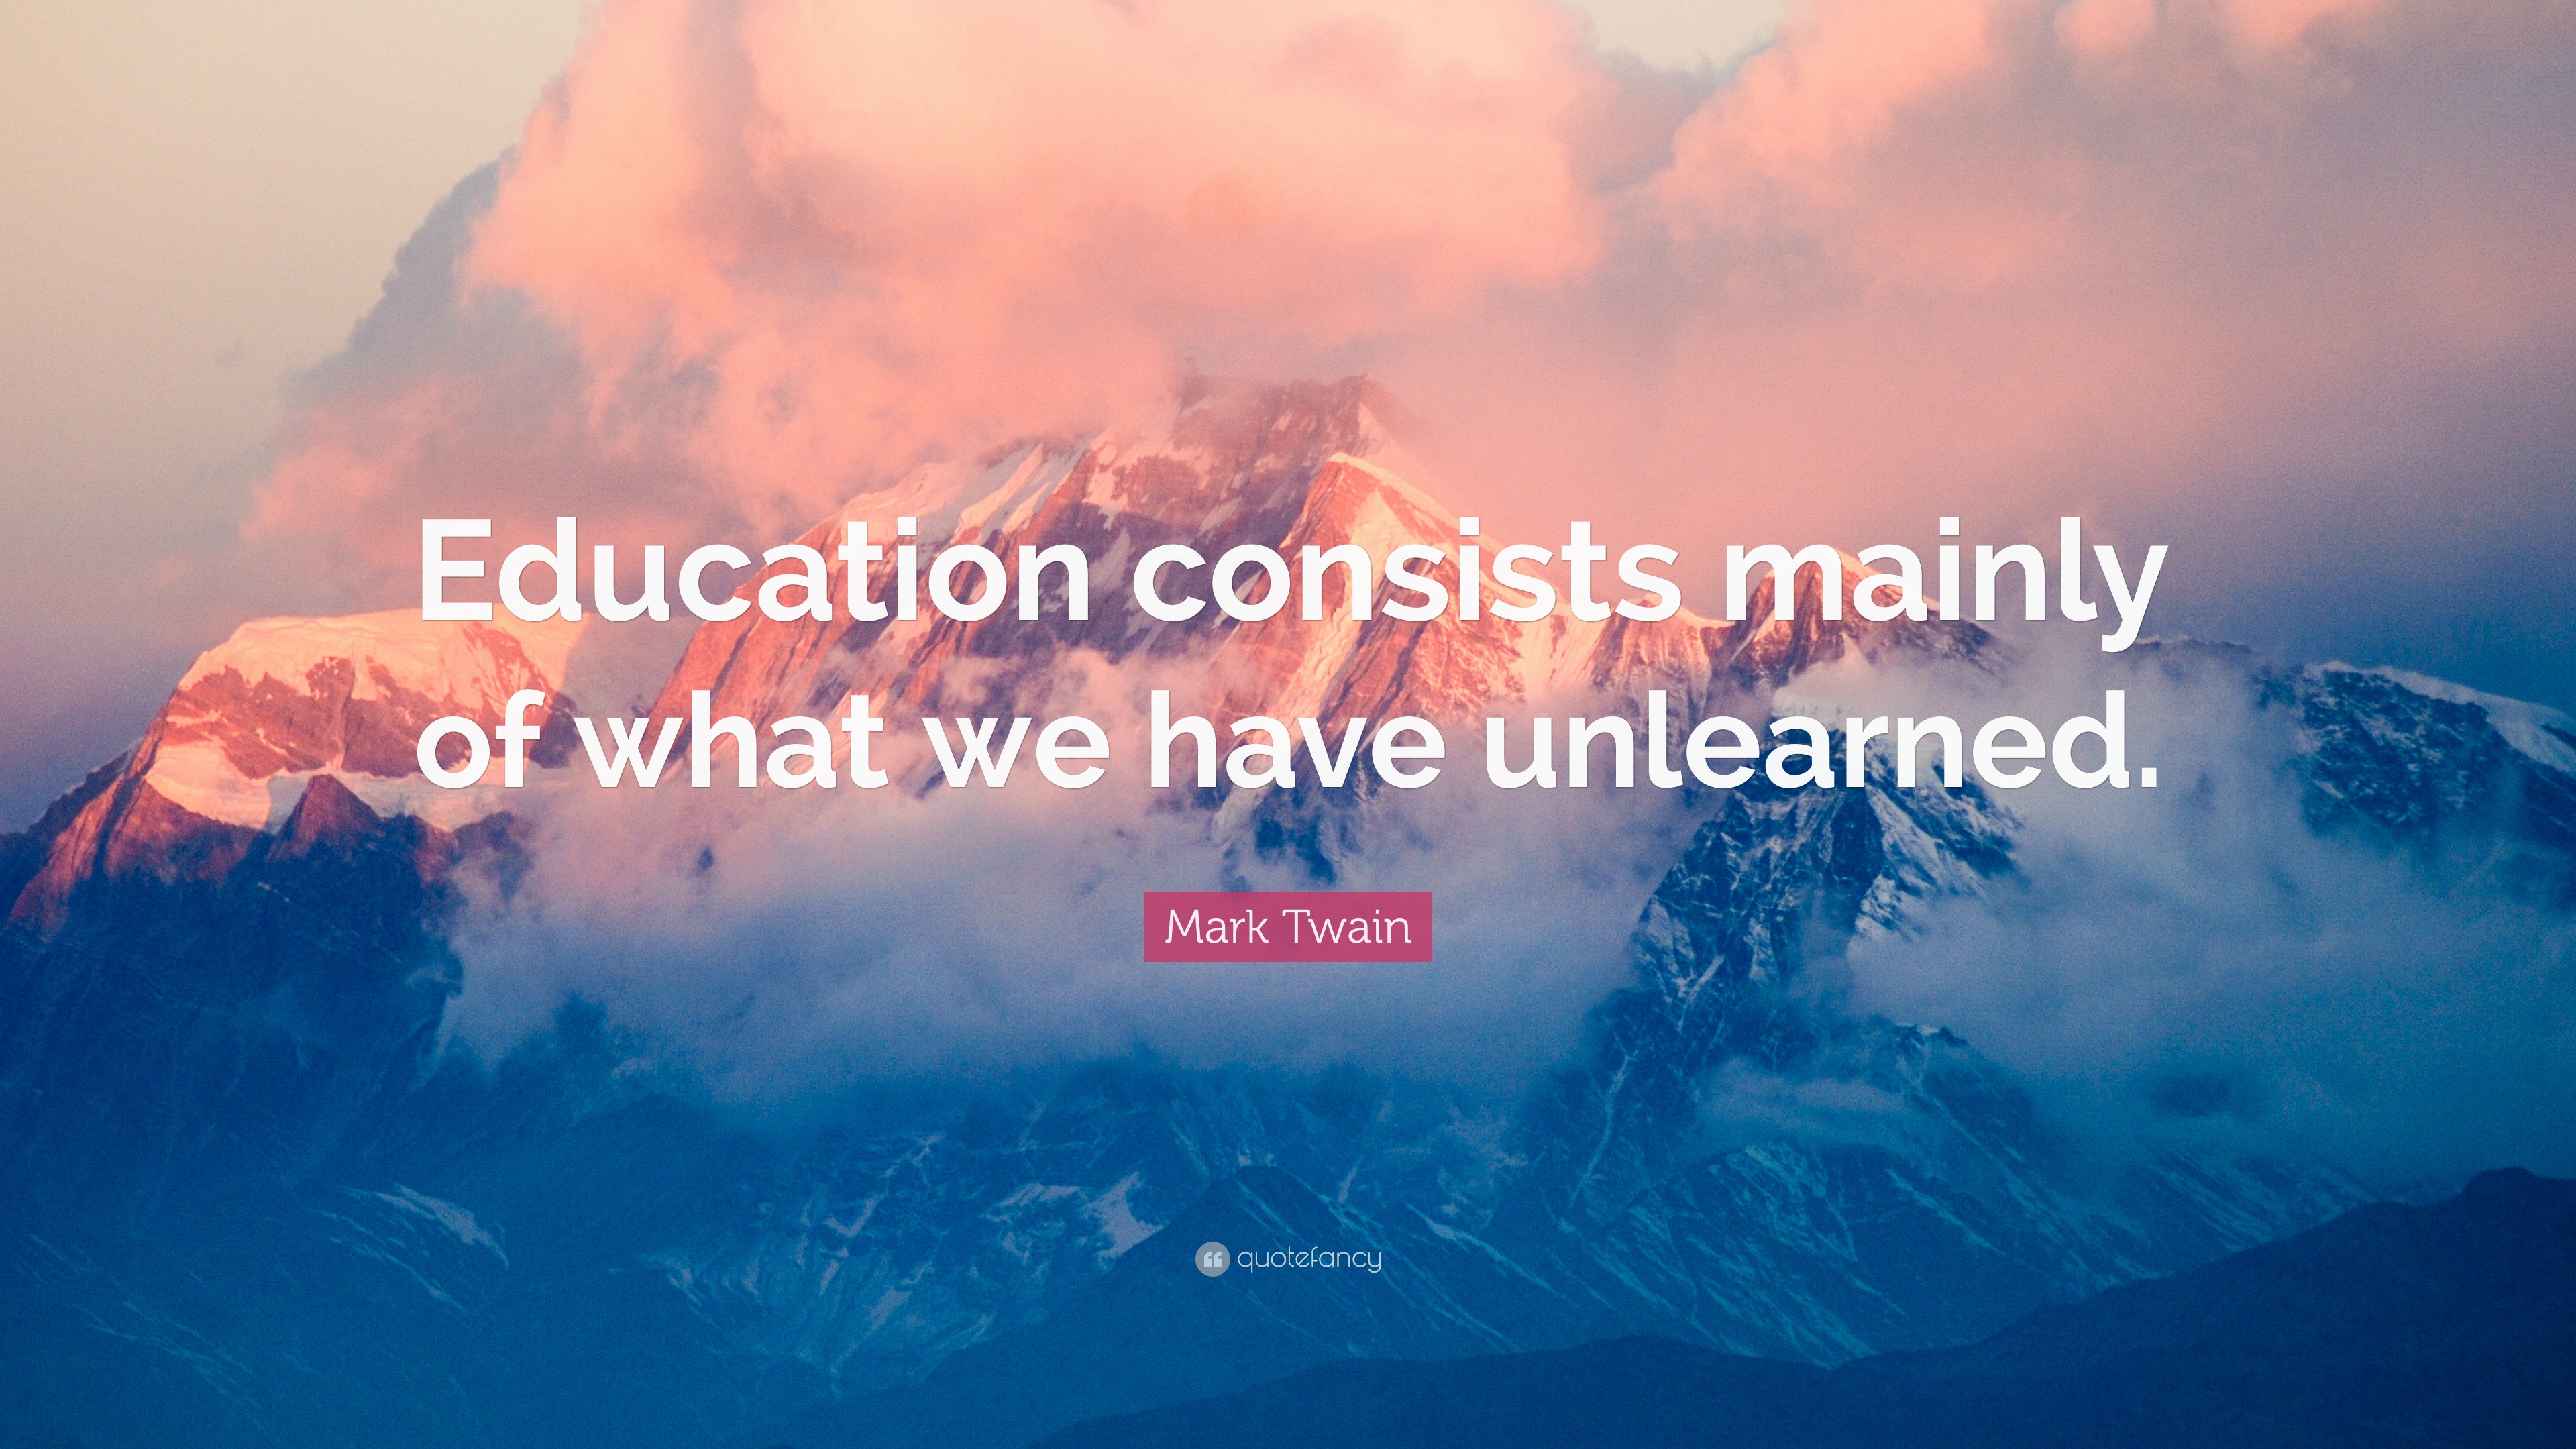 Mark Twain Quote: “Education consists mainly of what we have unlearned.”